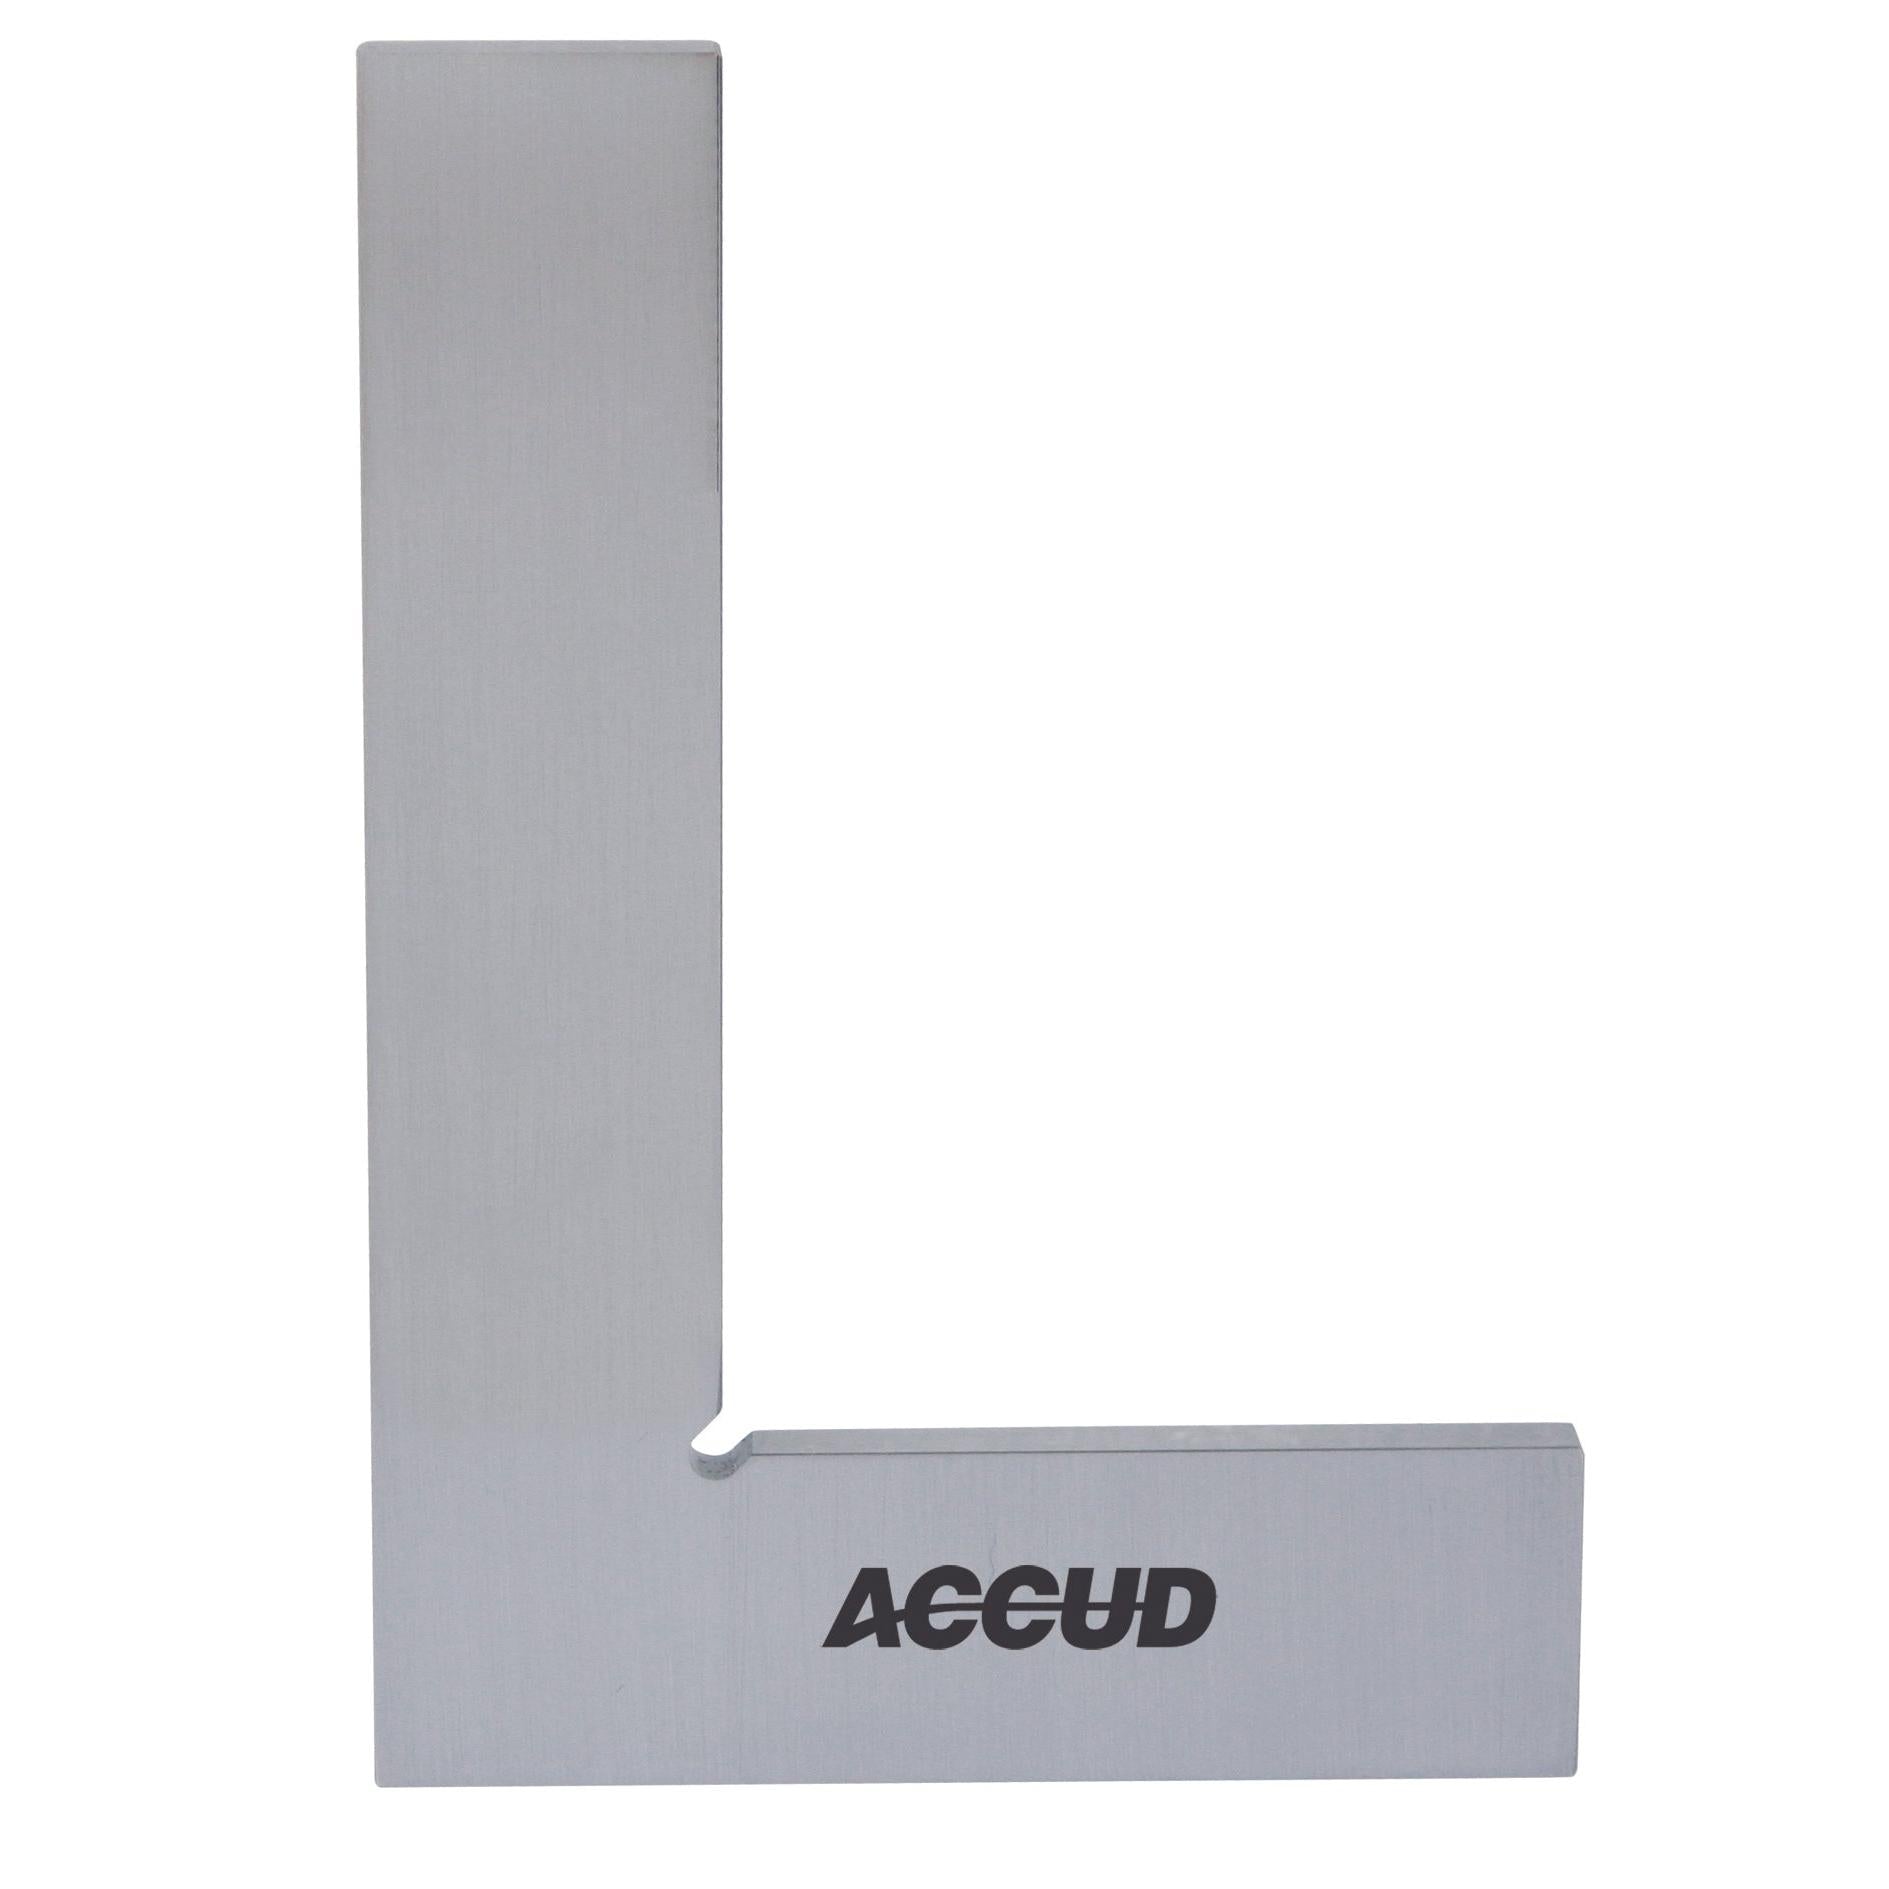 ACCUD | Flat Edge Square 75X50Mm | 841-003-10 Power Tool Services